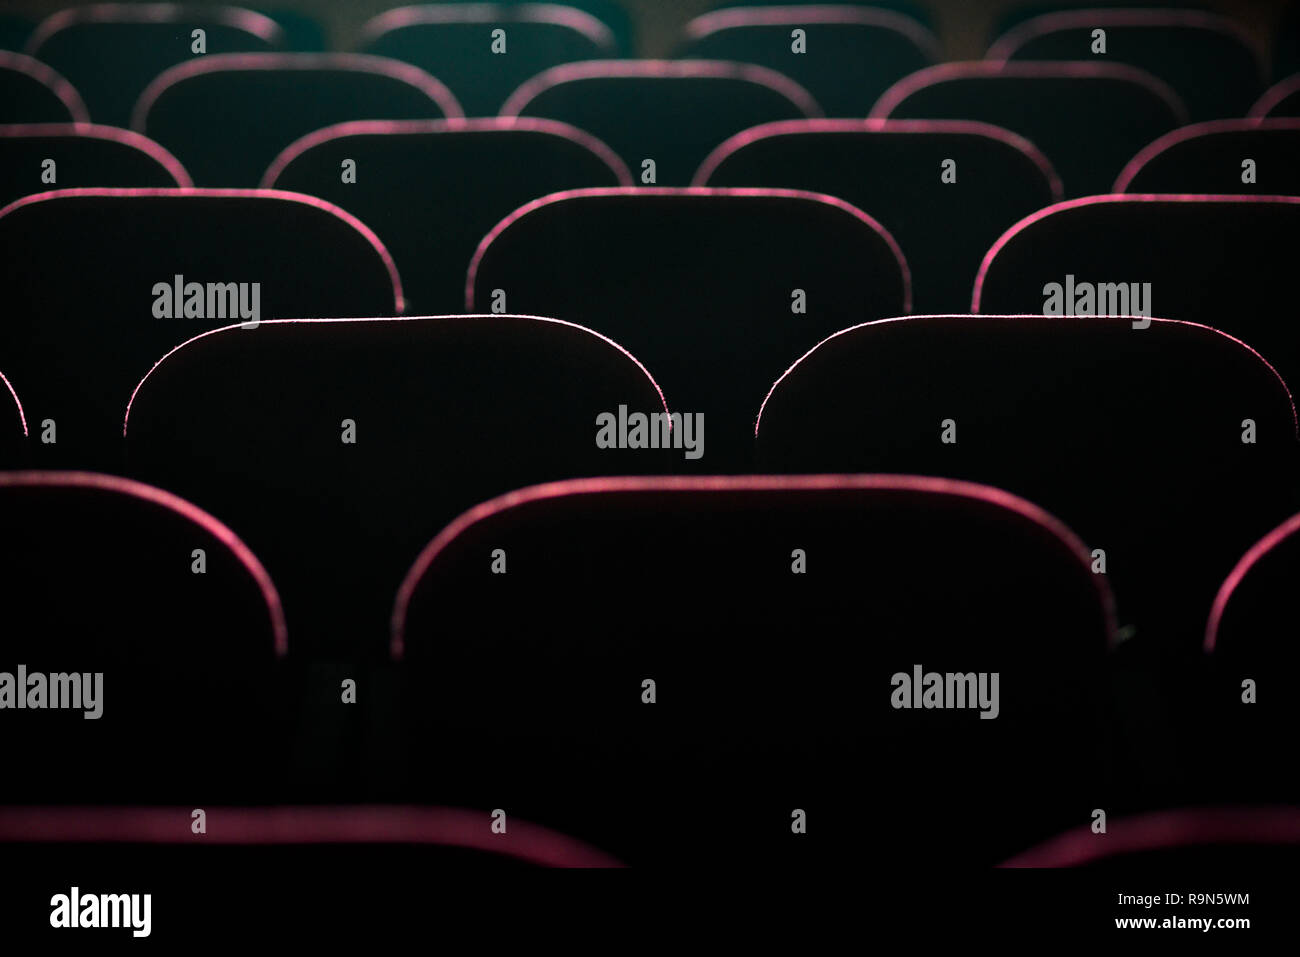 Seats in the cinema illuminated by the light from the screen. Stock Photo